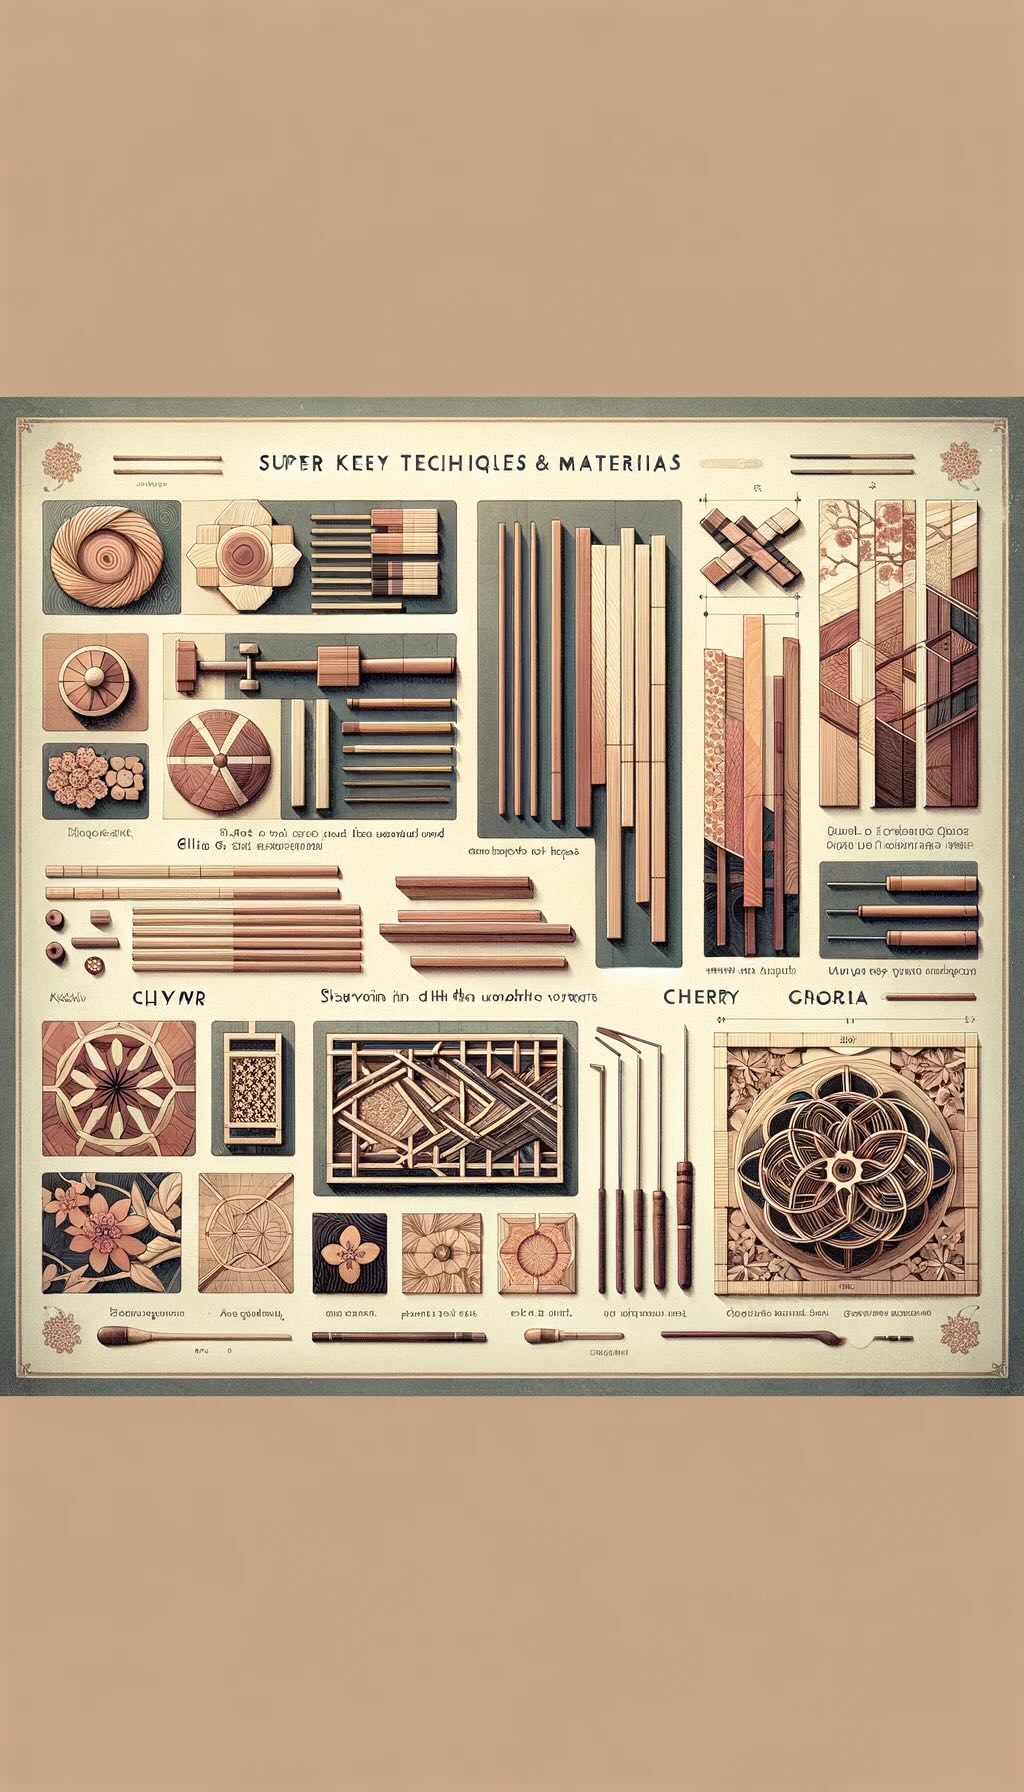 Key techniques and materials used in Yosegi-zaiku, a traditional Japanese woodworking craft illustrates the selection of different woods like keyaki, katsura, cherry, and magnolia, and portrays the precision crafting process, including the shaping of rods, gluing, and shaving into thin veneers. The intricate geometric patterns and nature-inspired motifs characteristic of Yosegi-zaiku are emphasized, along with the symbolic representations found in the designs. Rendered in a super vintage style with soft, muted colors, the artwork conveys the meticulous skill and patience of the artisans, showcasing the beauty and complexity of this traditional Japanese woodworking technique.